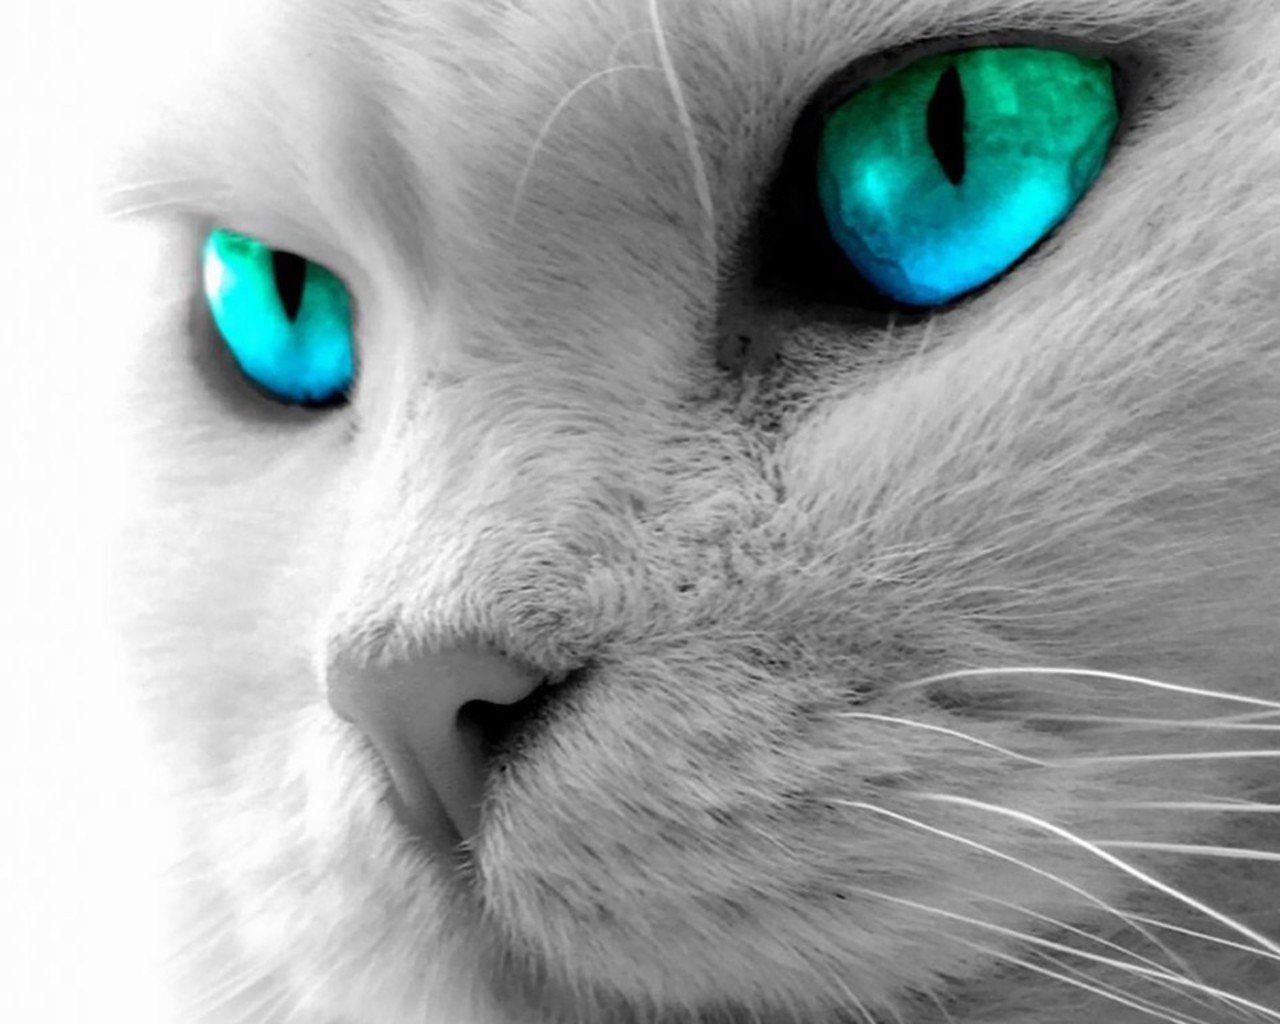 eyes 2 green. Cat with blue eyes, Grey cats, Beautiful cats